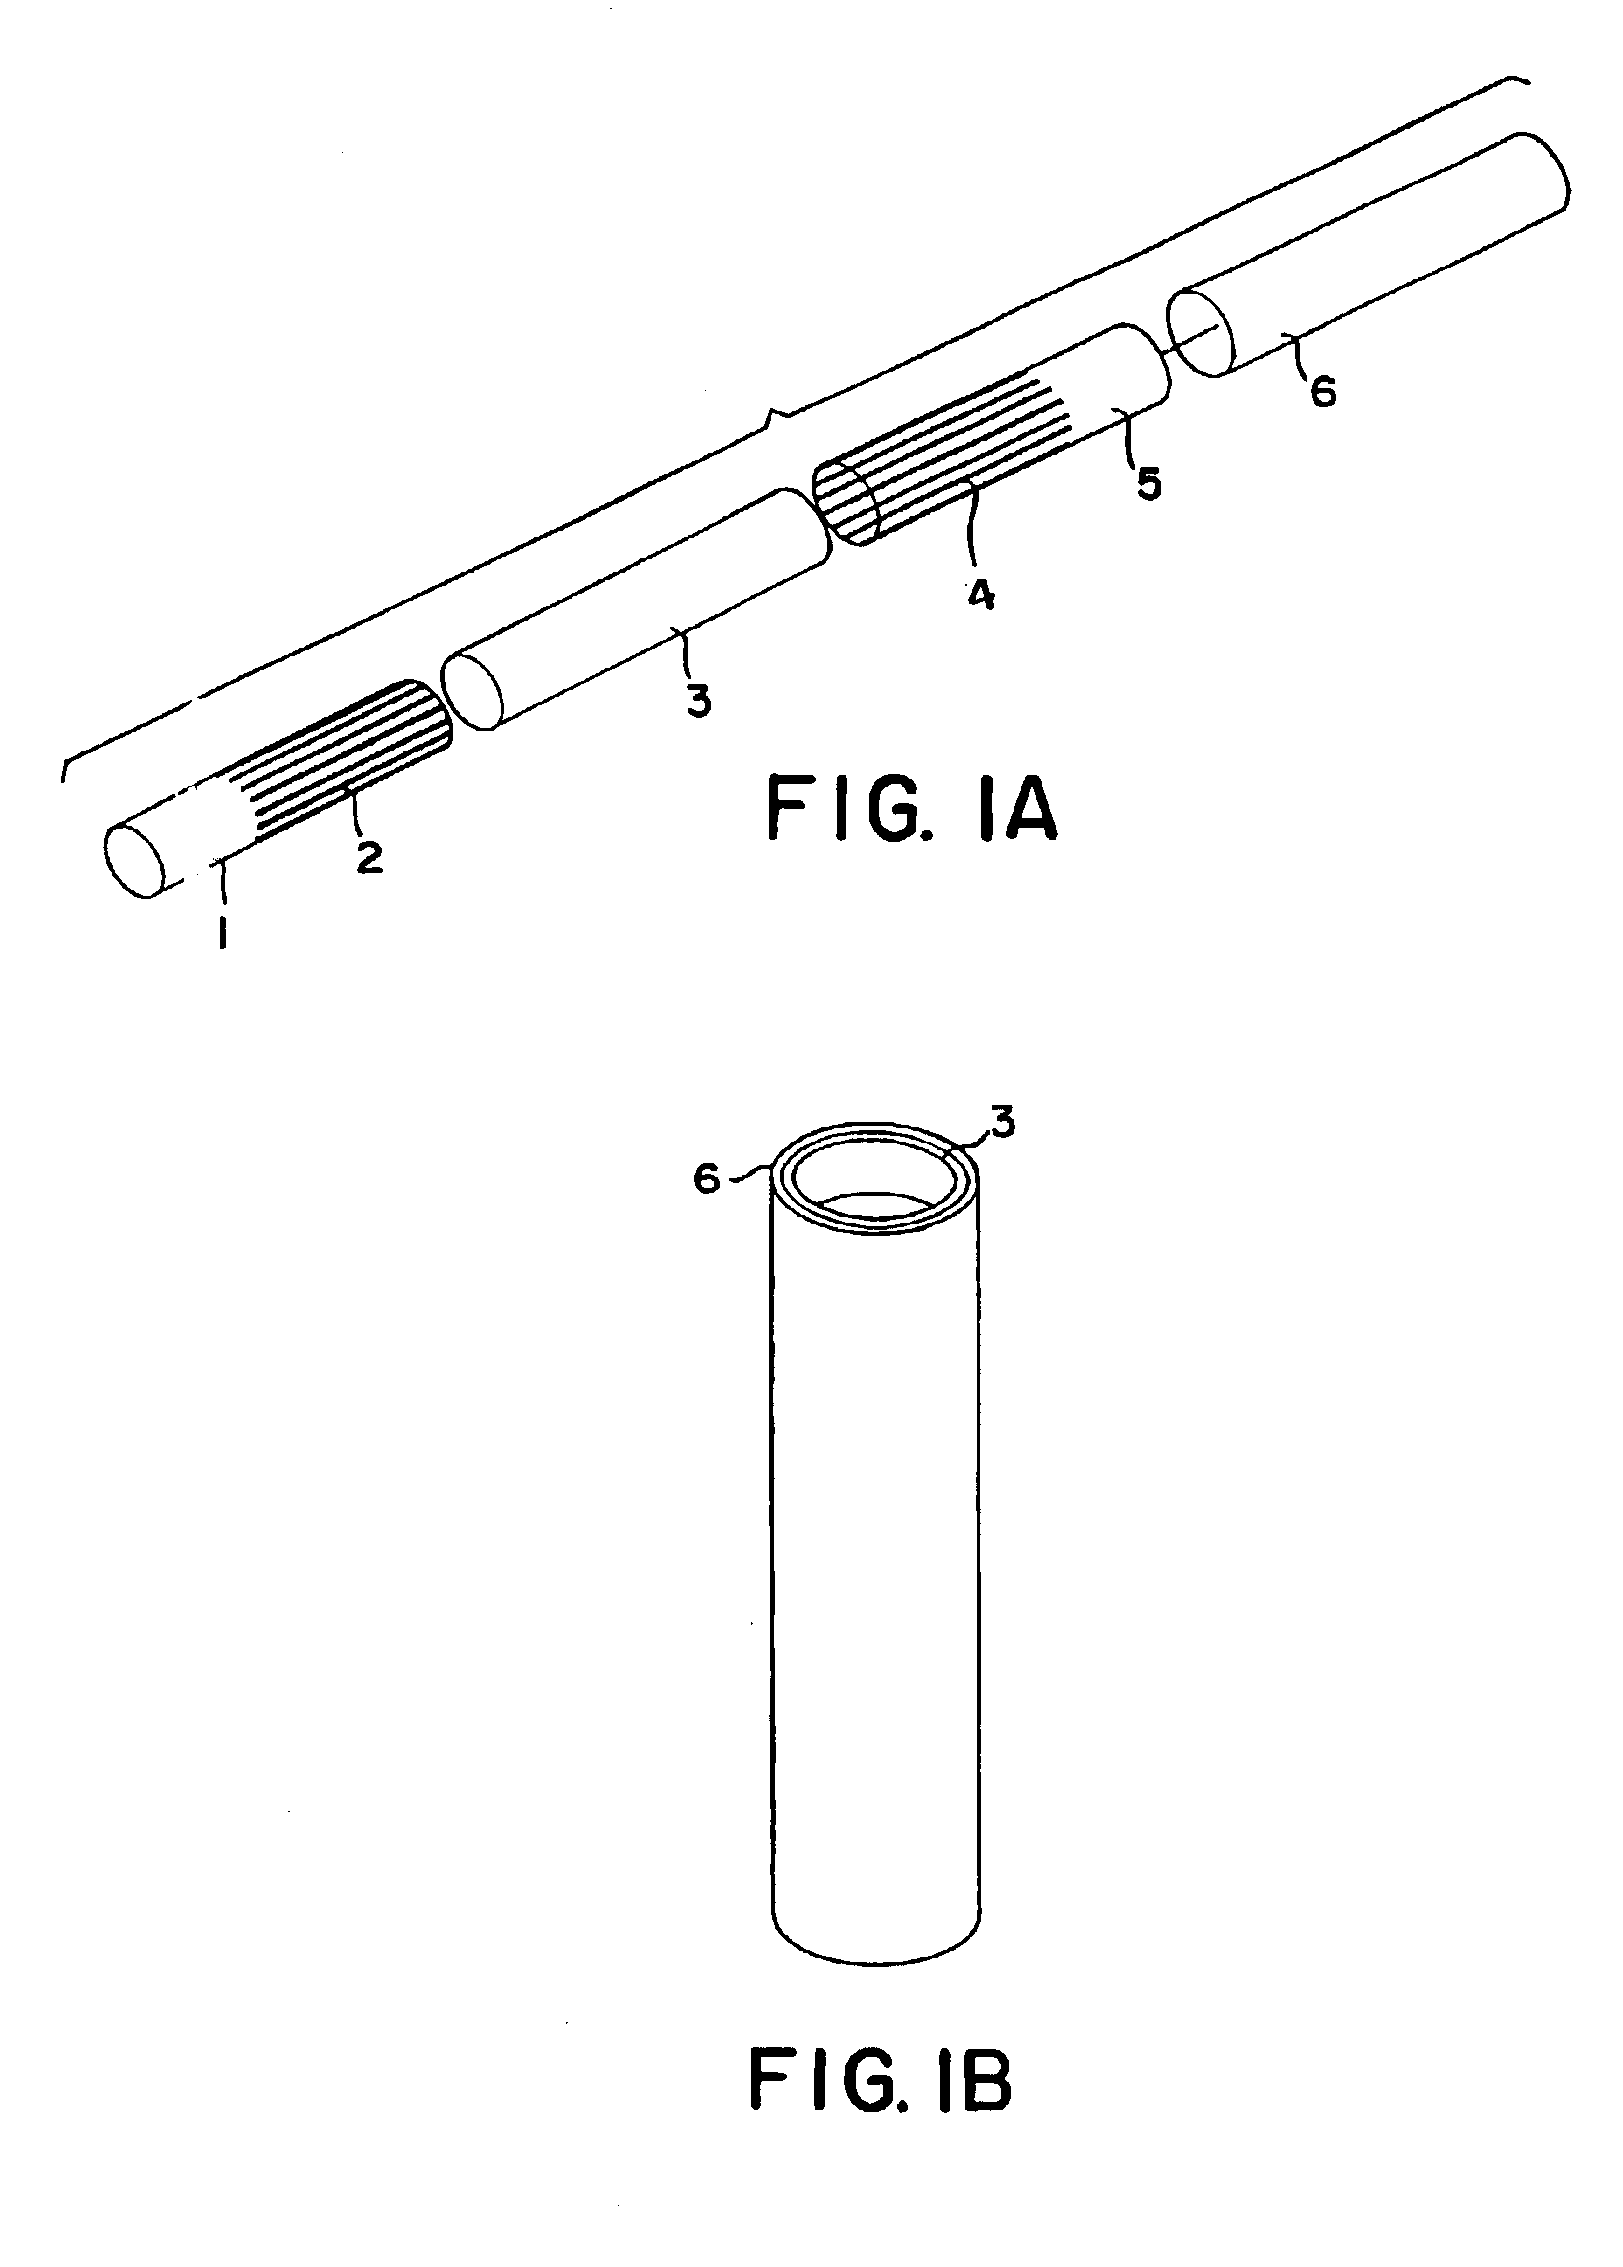 NMR probe having an inner quadrature detection coil combined with a spiral wound outer coil for irradiation